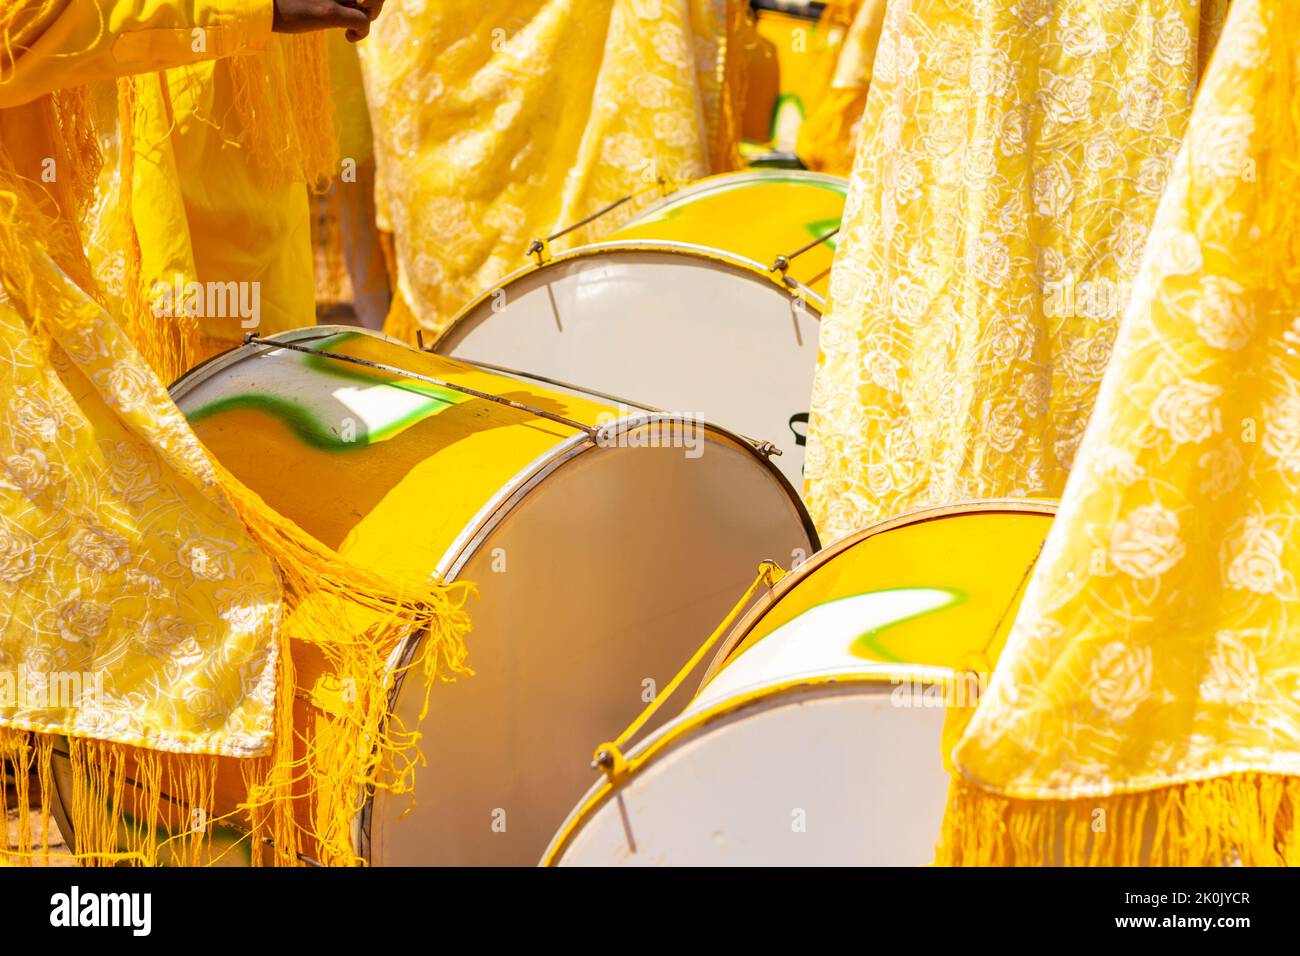 Goiânia, Goias, Brazil – September 11, 2022: Detail of some revelers using yellow drums during the Congadas, an Afro-Brazilian cultural and religious Stock Photo